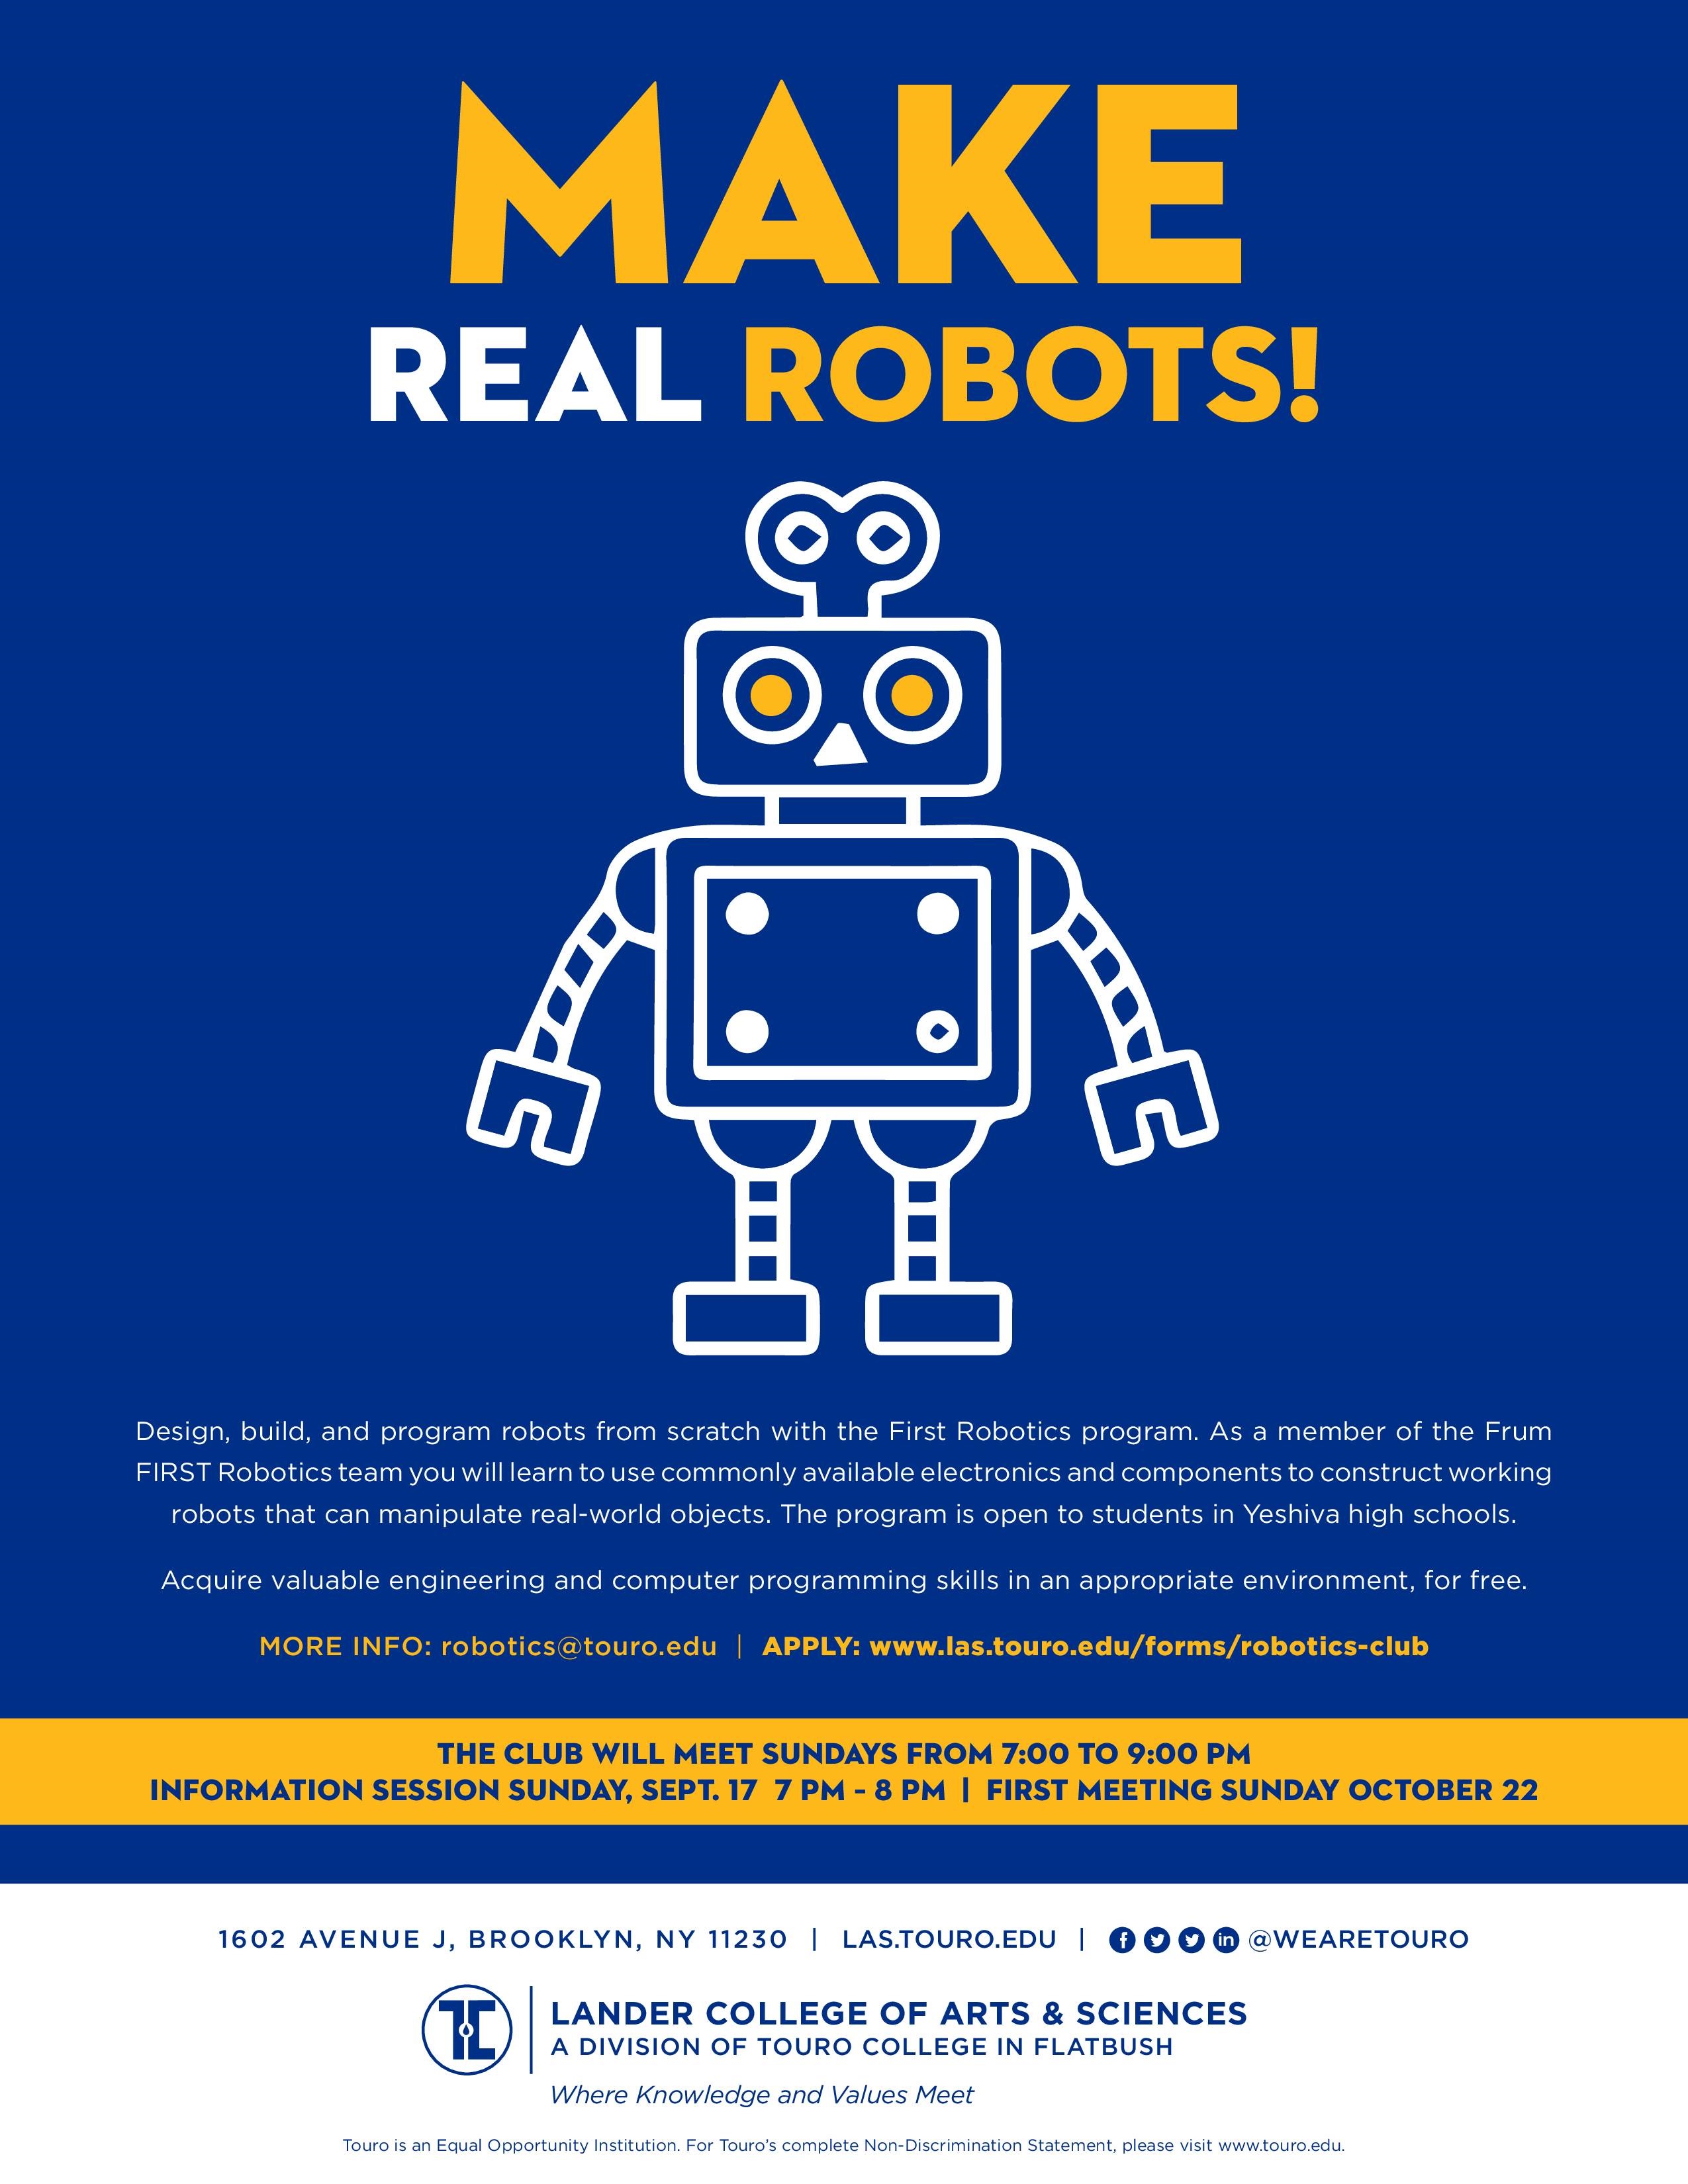 Join the frum FIRST robotics team and make real robots!